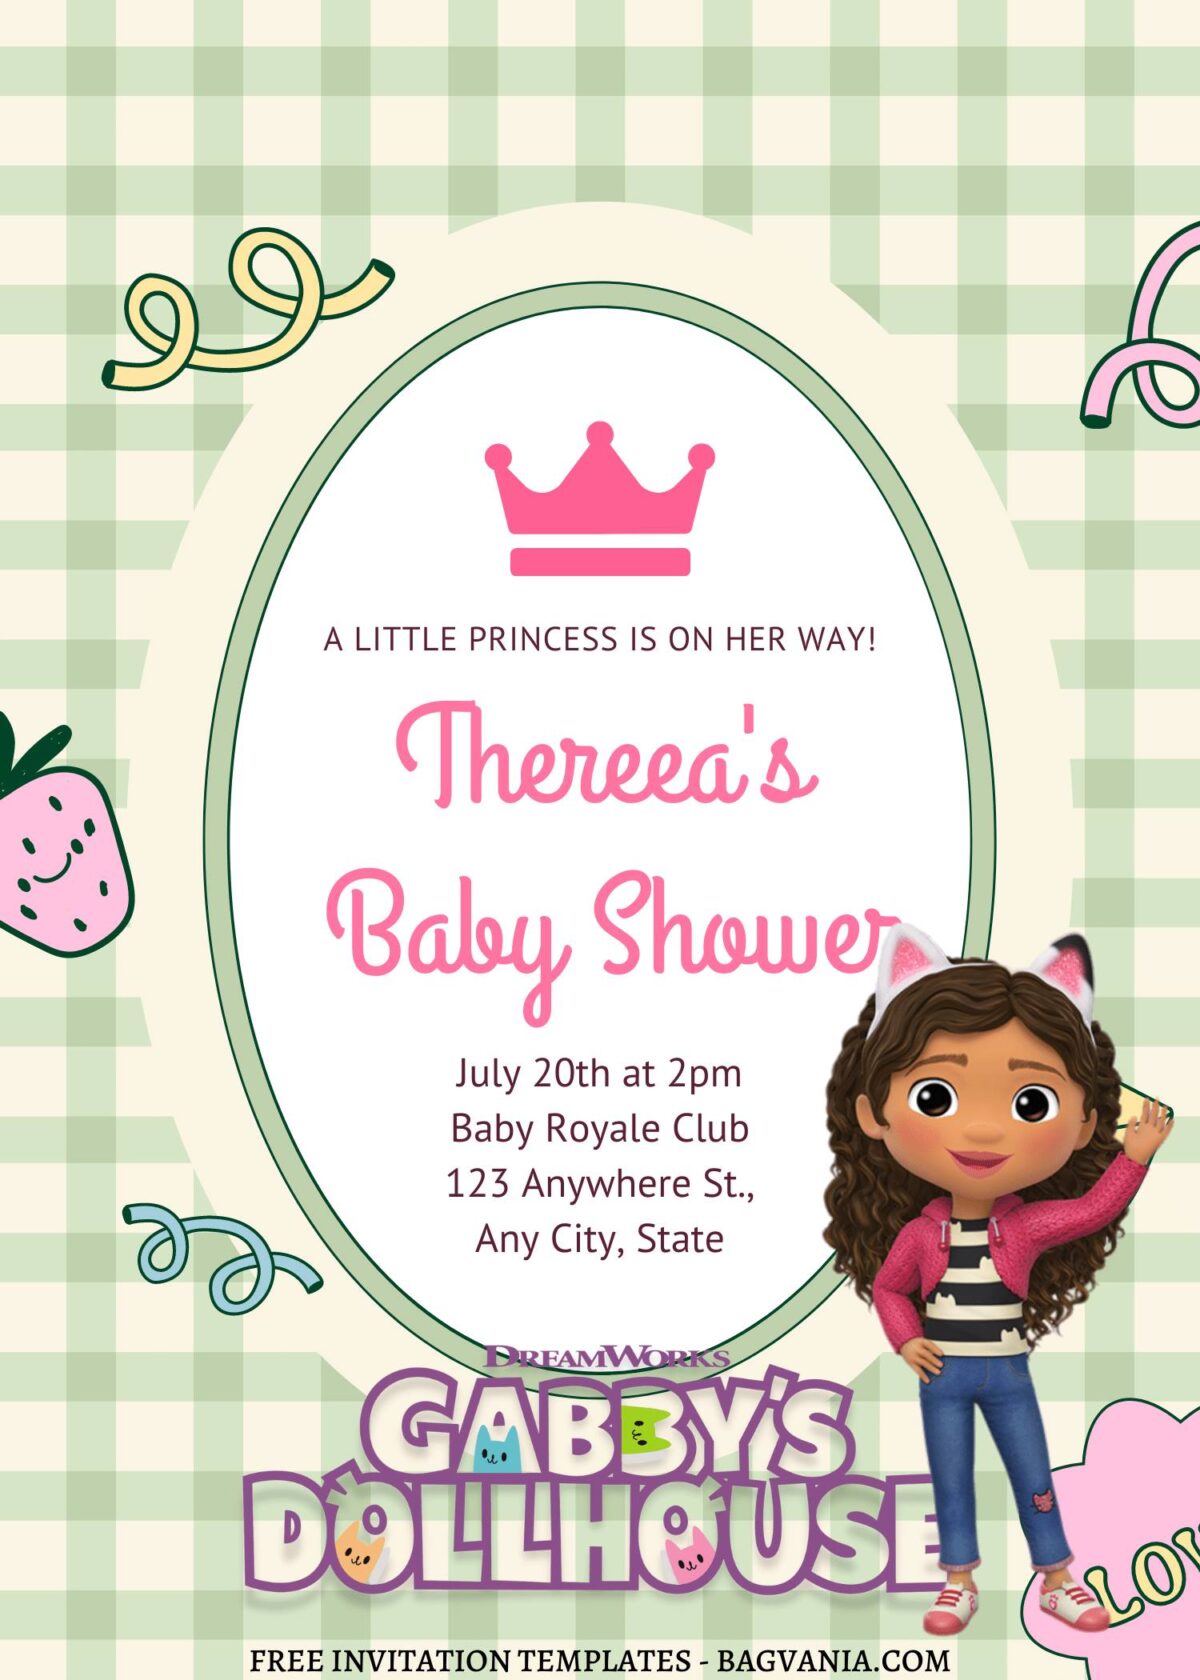 7+ Gabby Dollhouse And Her Furry Friends Canva Birthday Invitation Templates with Hand drawn Strawberry